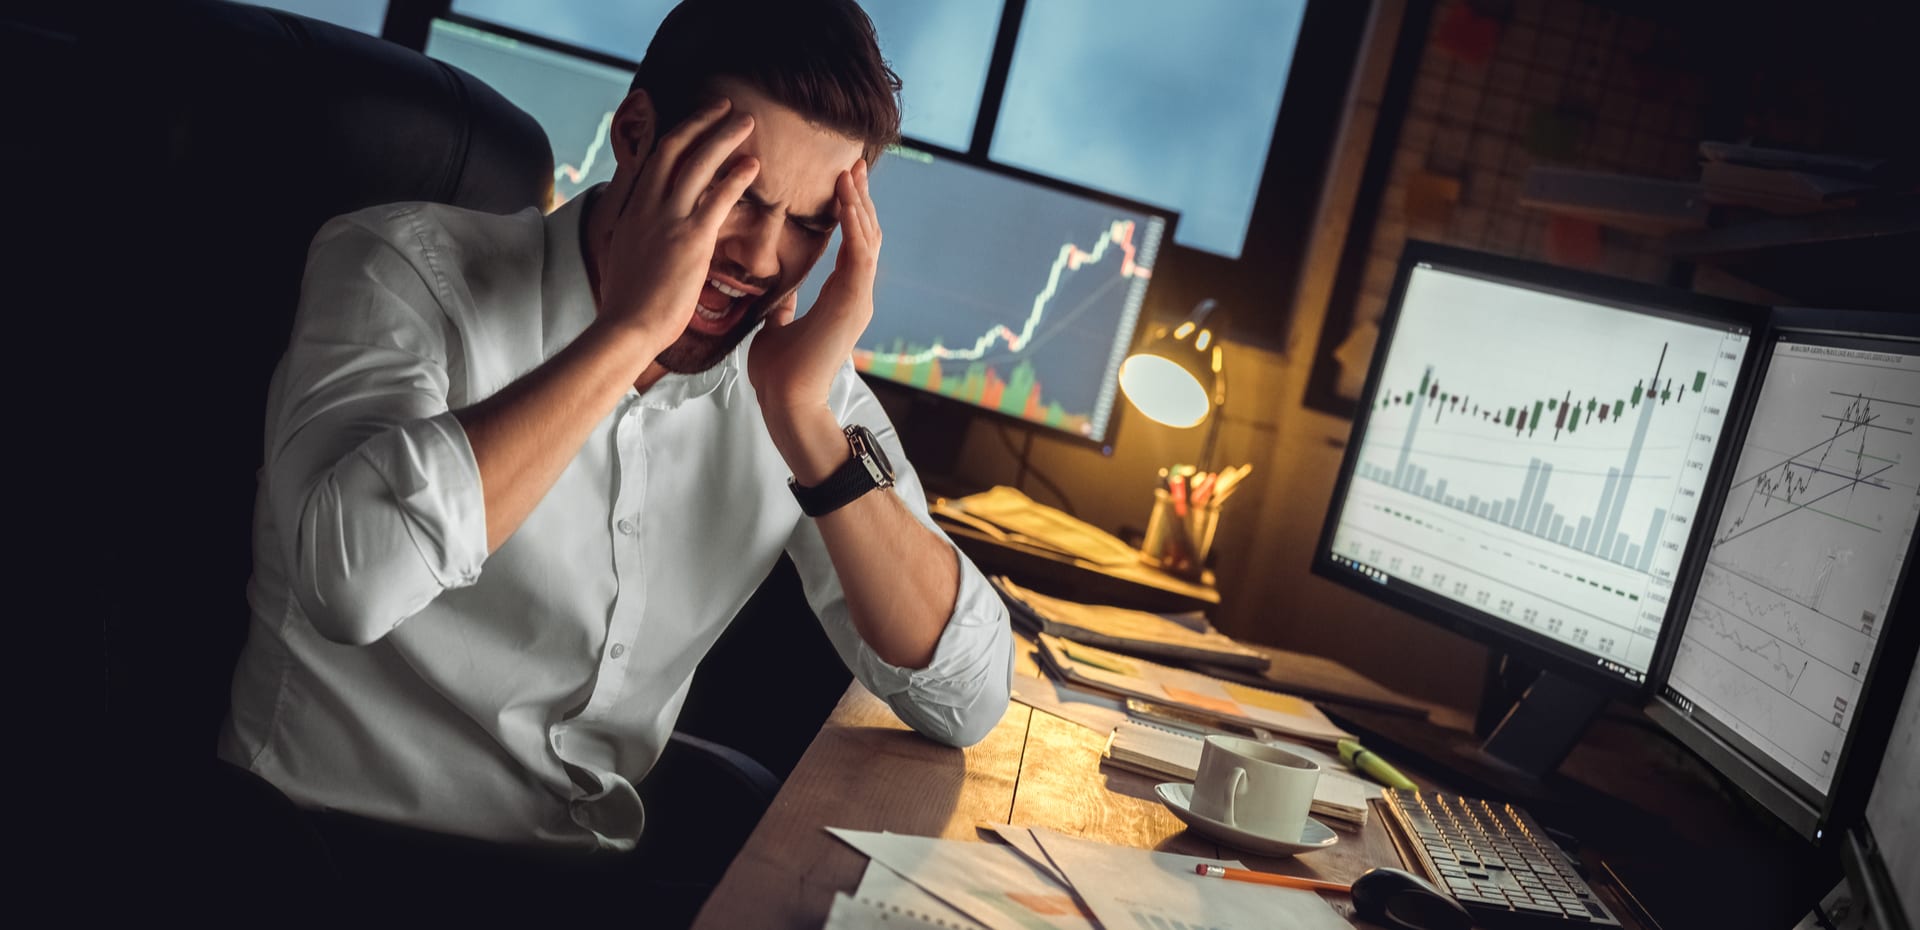 7 investment mistakes investors make and how to avoid them – get business strategy